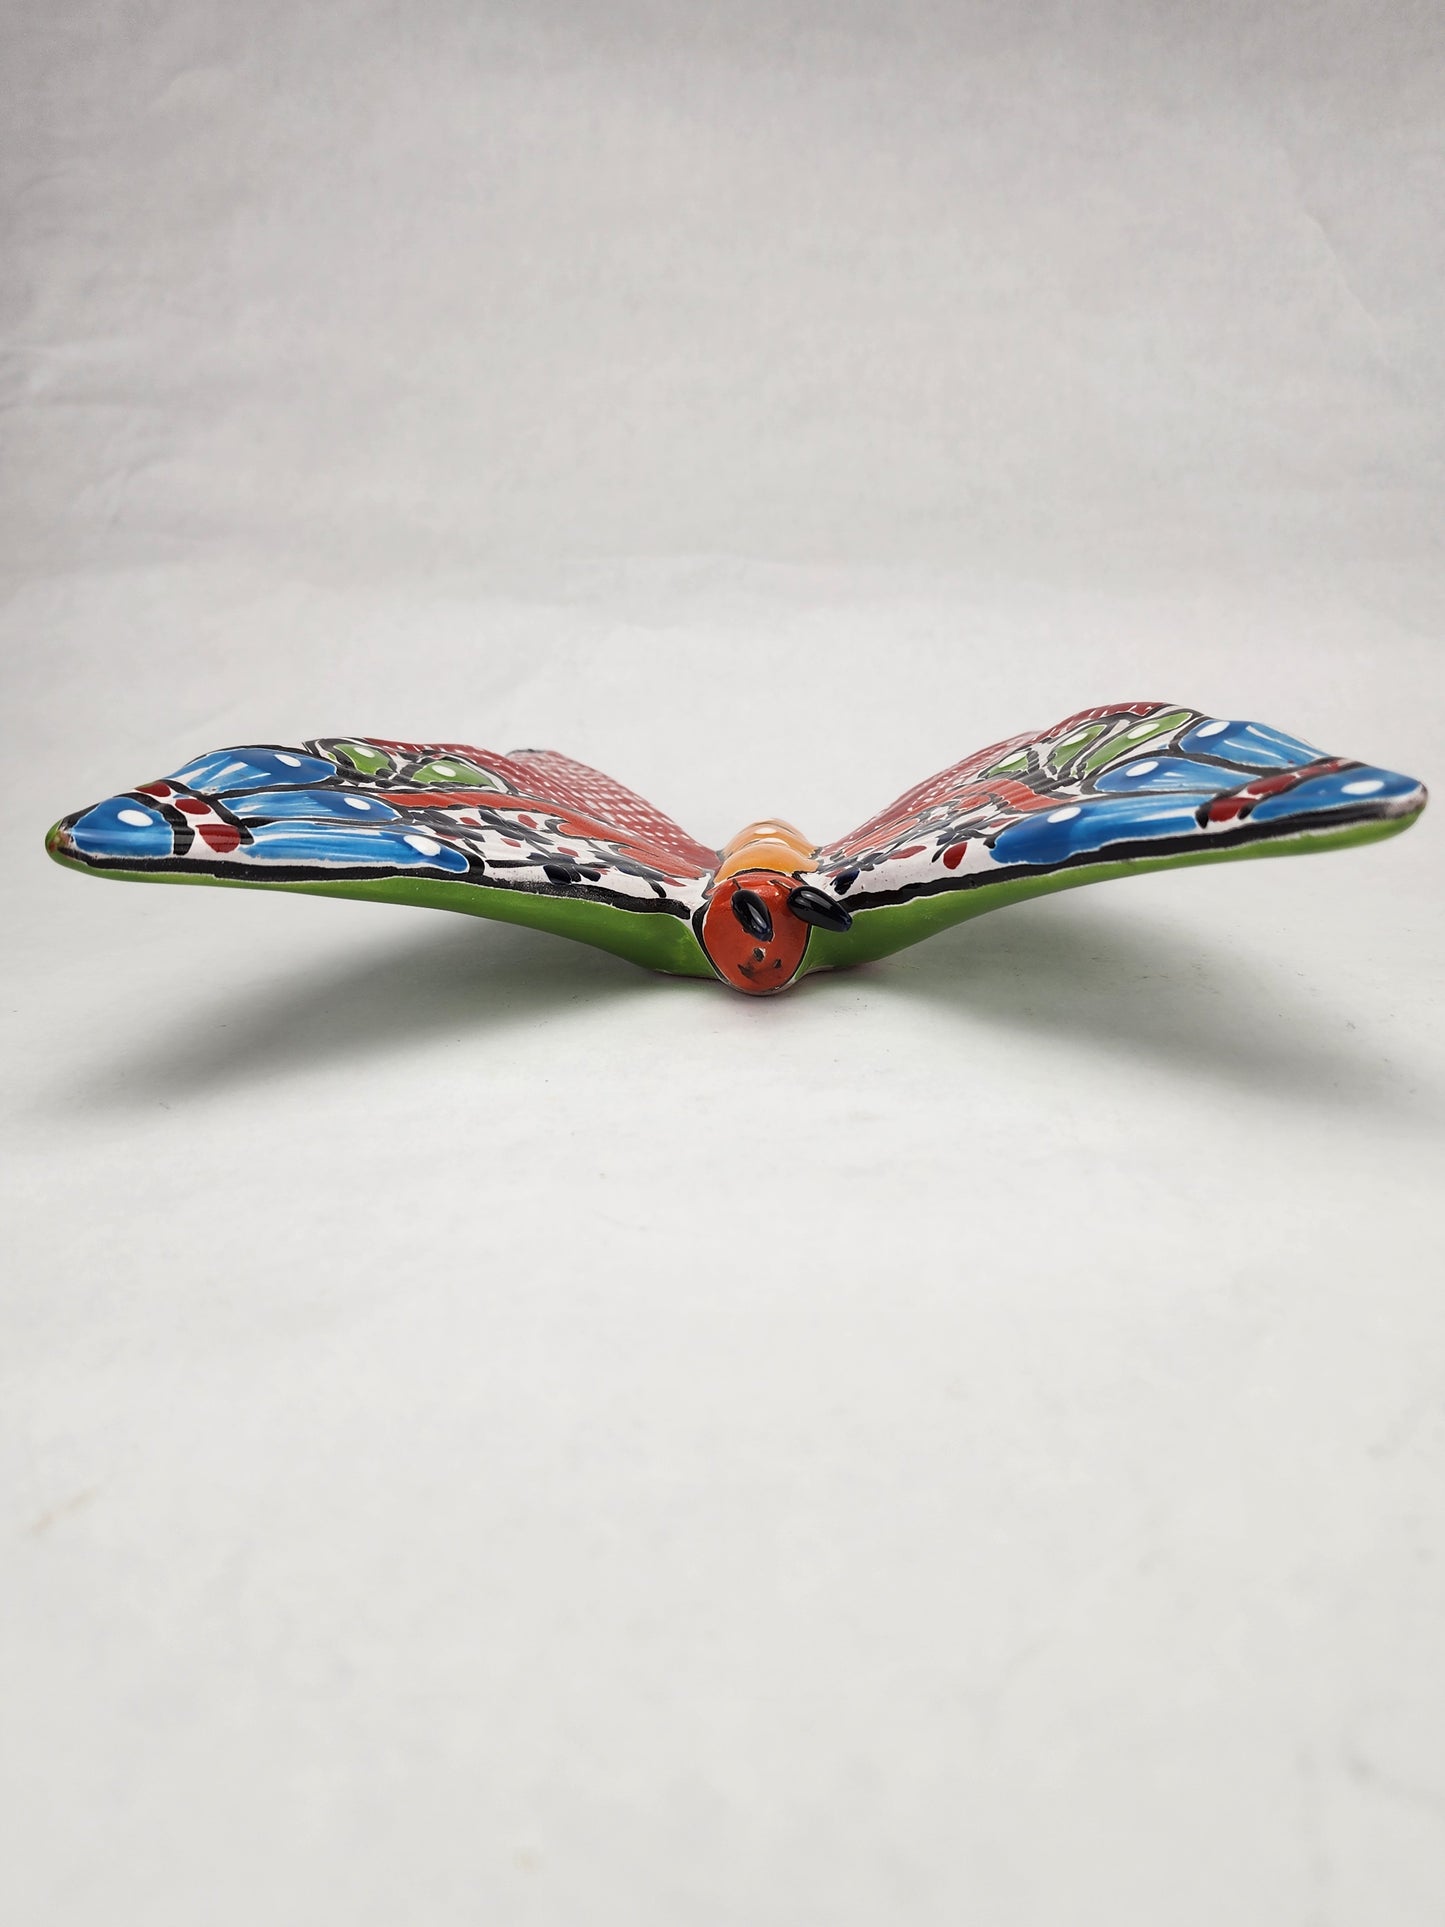 Butterfly Figurine Wall Deco Hand Painted Mexican Talavera